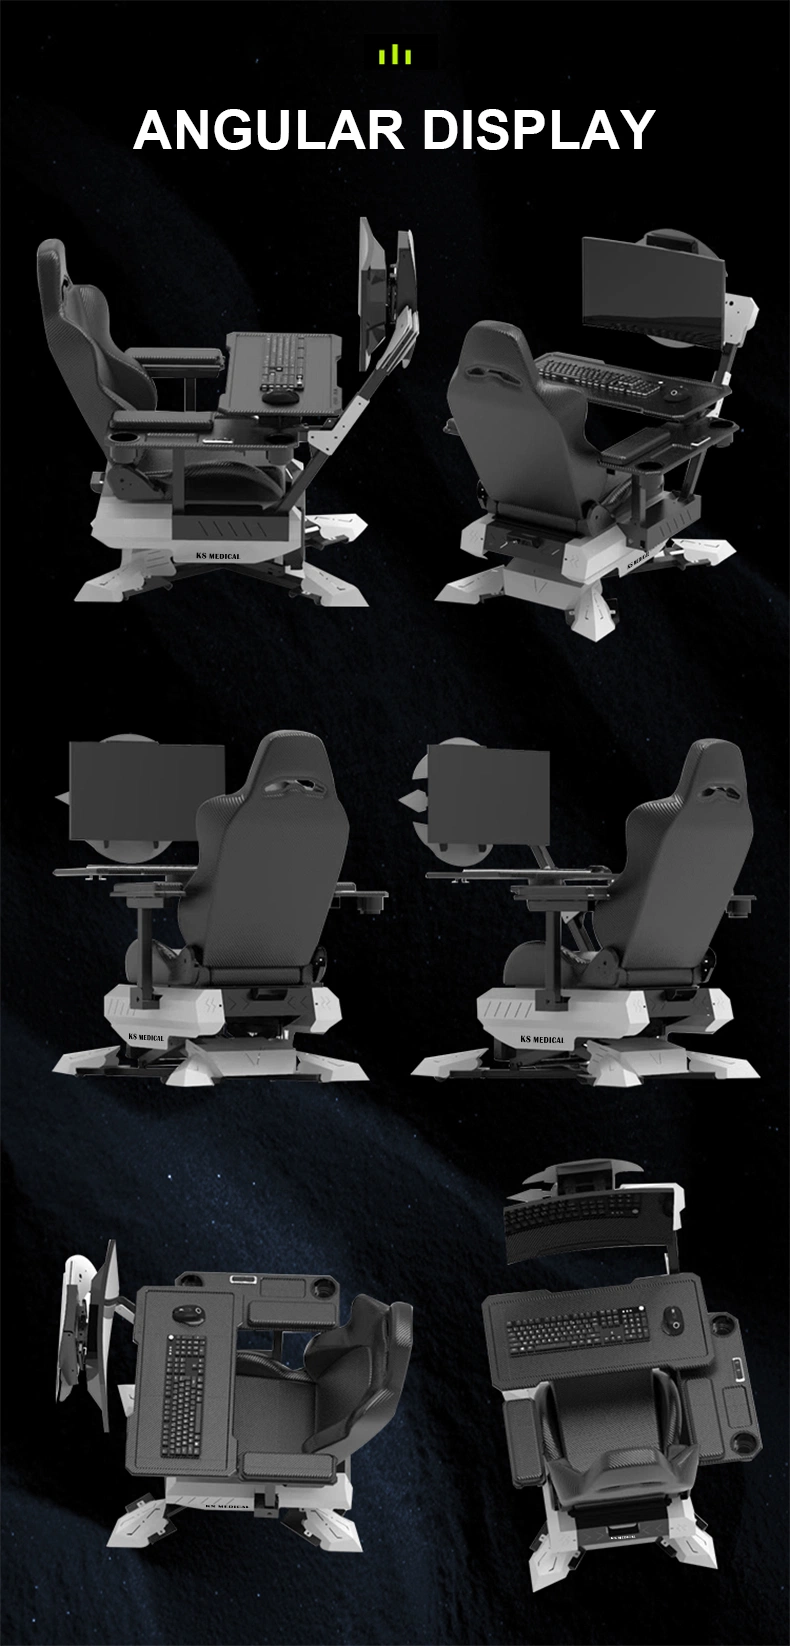 Ksm-Gc5r Fully Recline Gaming Chair Cockpit Gaming Gamer Desk and Chairs Cockpit Gaming Chair Zero Gravity Design Best Chair Most Comfortable